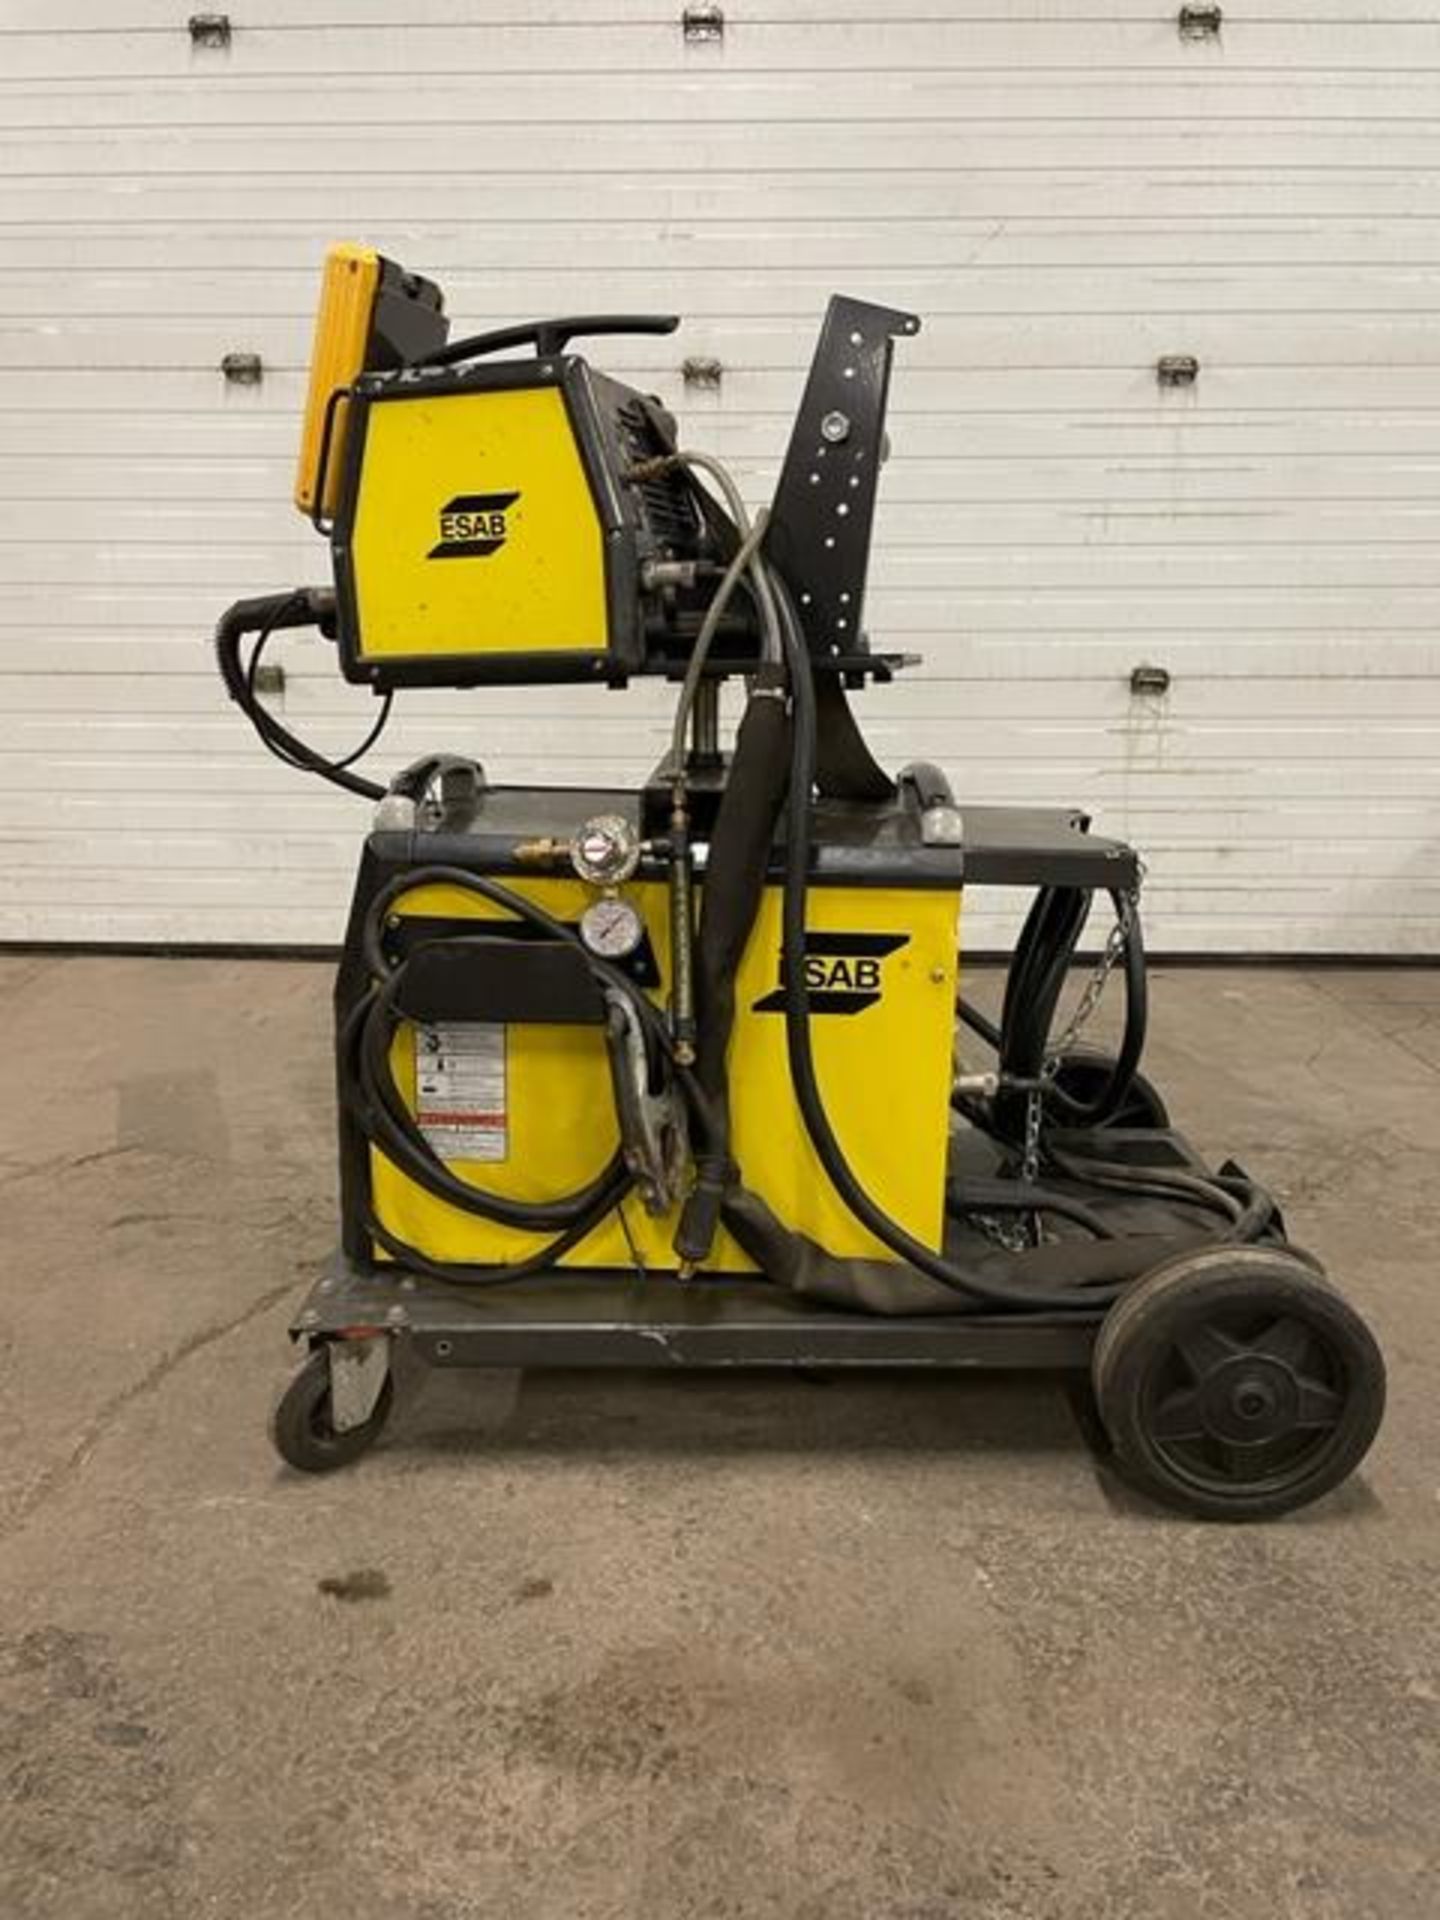 Esab AristoMig 500 Mig Welder Complete with Wire Feeder and Mig gun - 500 amp unit with remote - Image 2 of 3